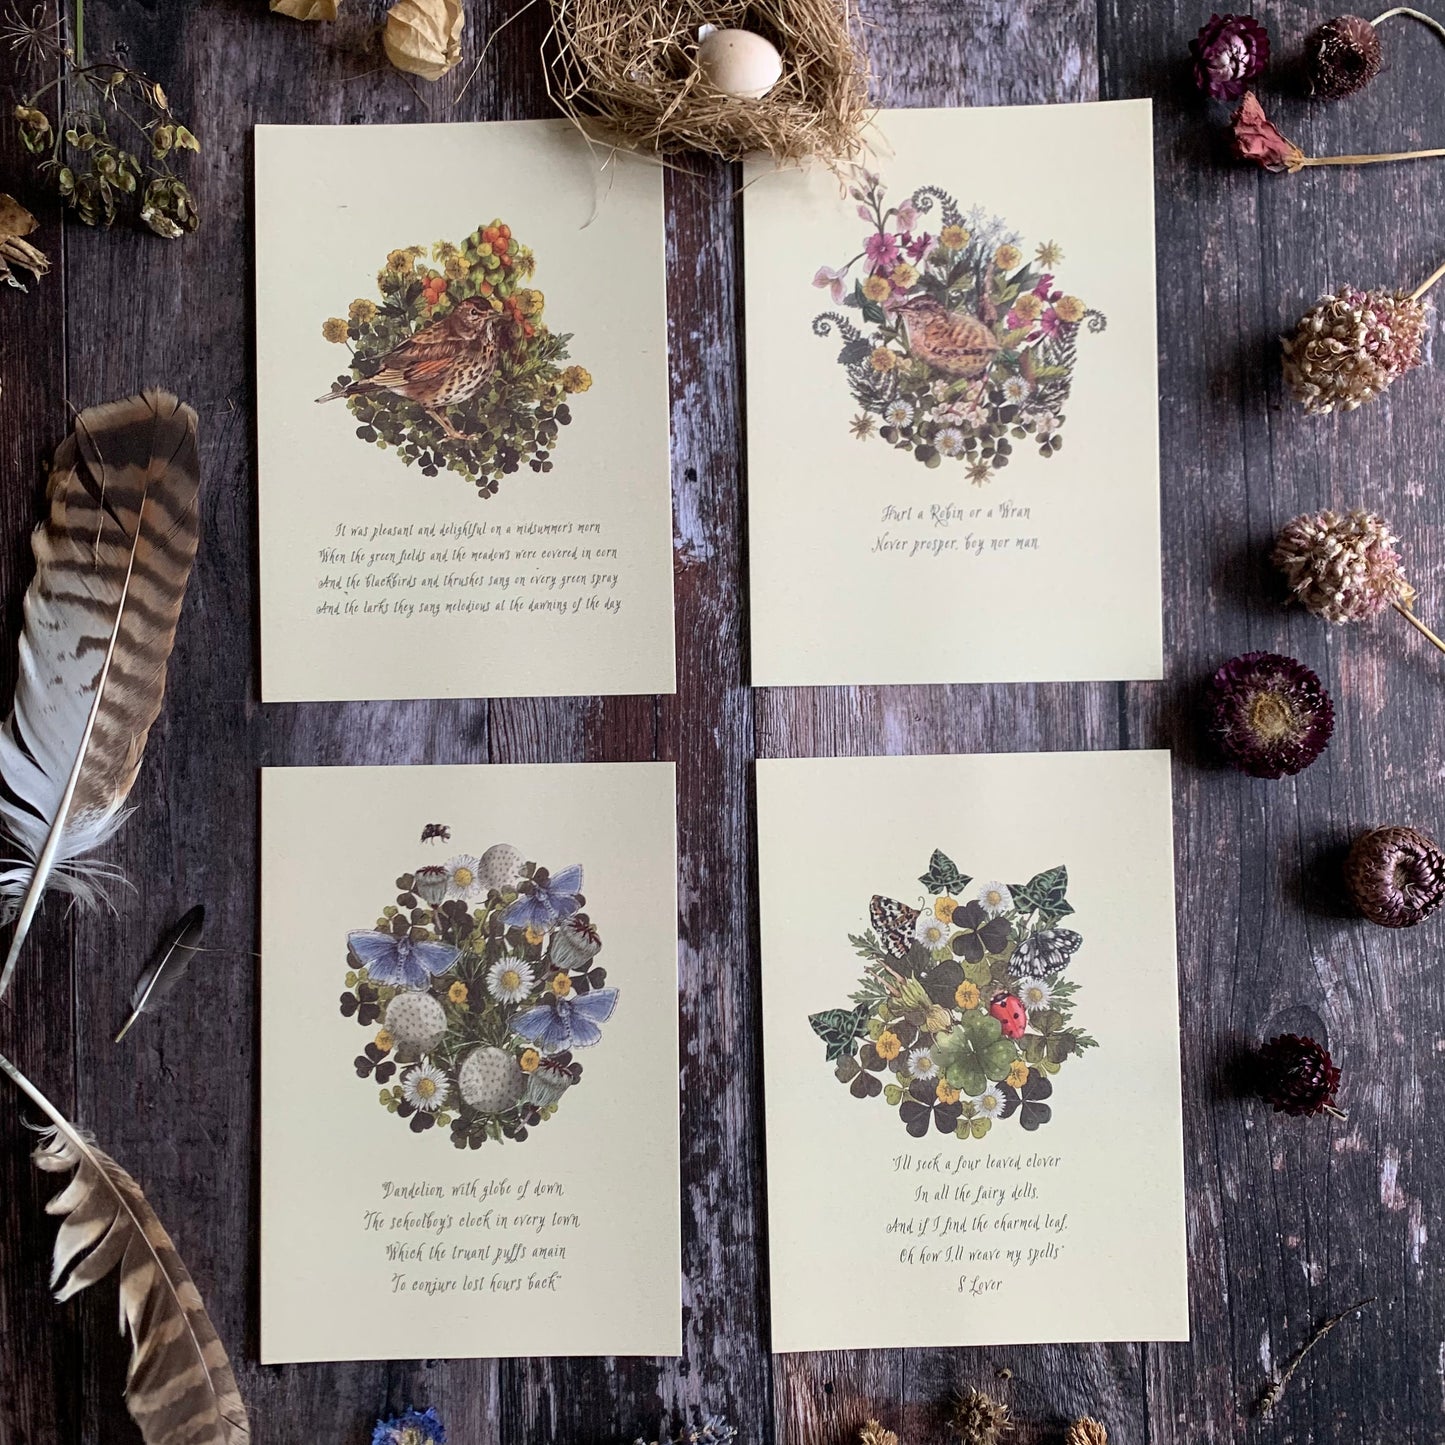 Botanical nature art, set of 4 nature prints featuring old English folklore phrases. Cosy art featuring Birds, butterflies, wildflowers,